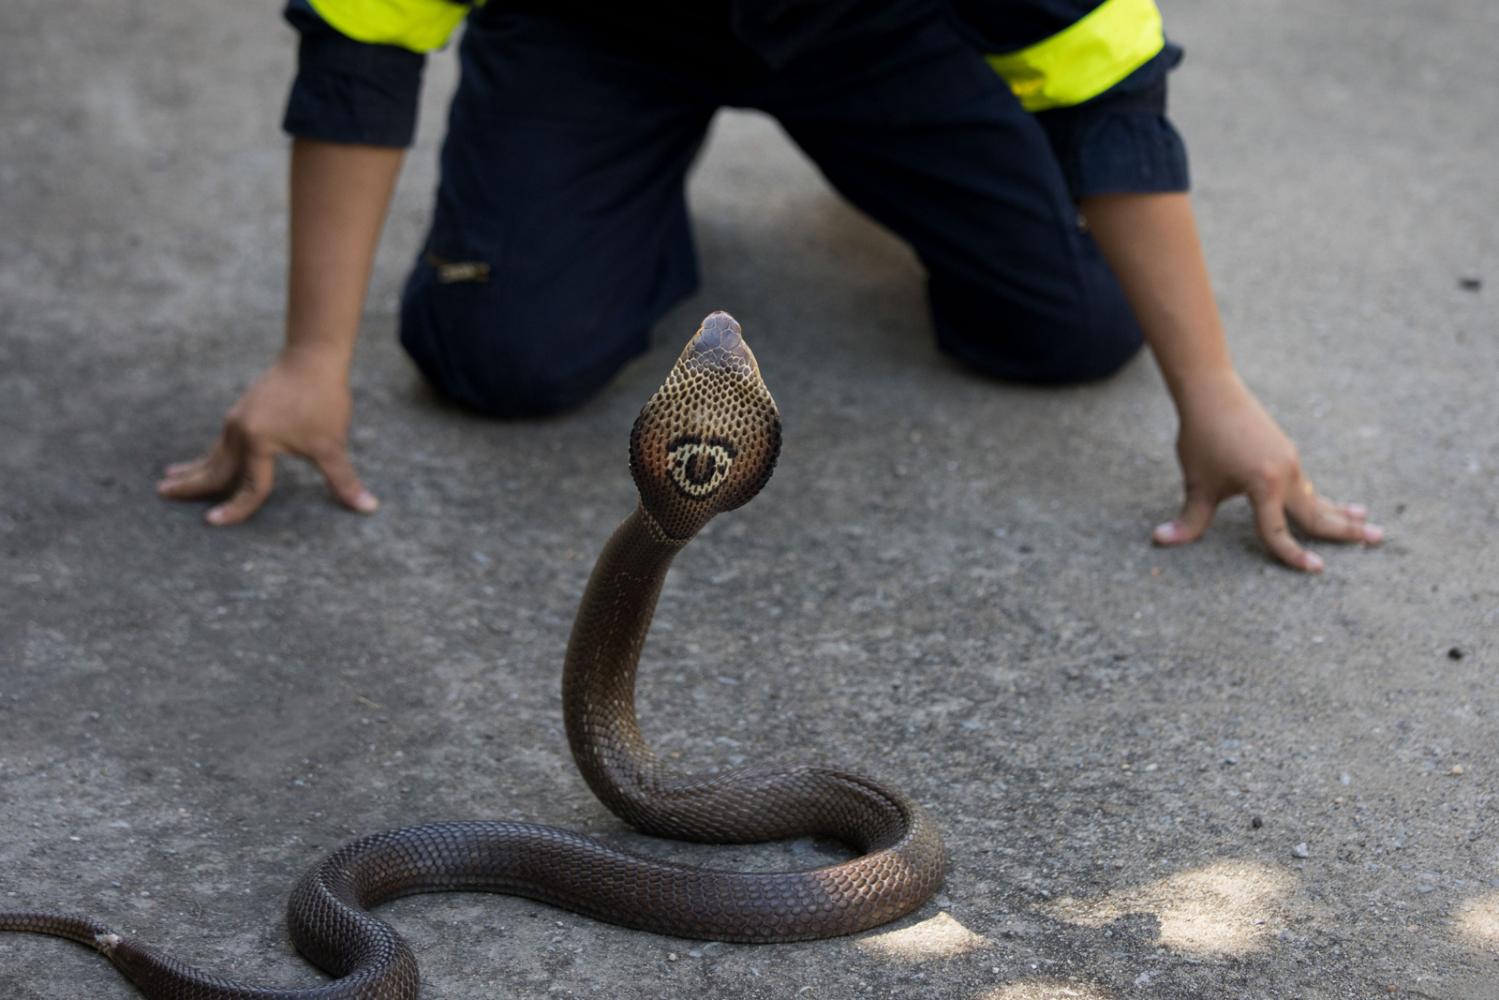 Image from Singles - Firefighters capture Bangkok's snakes from homes...